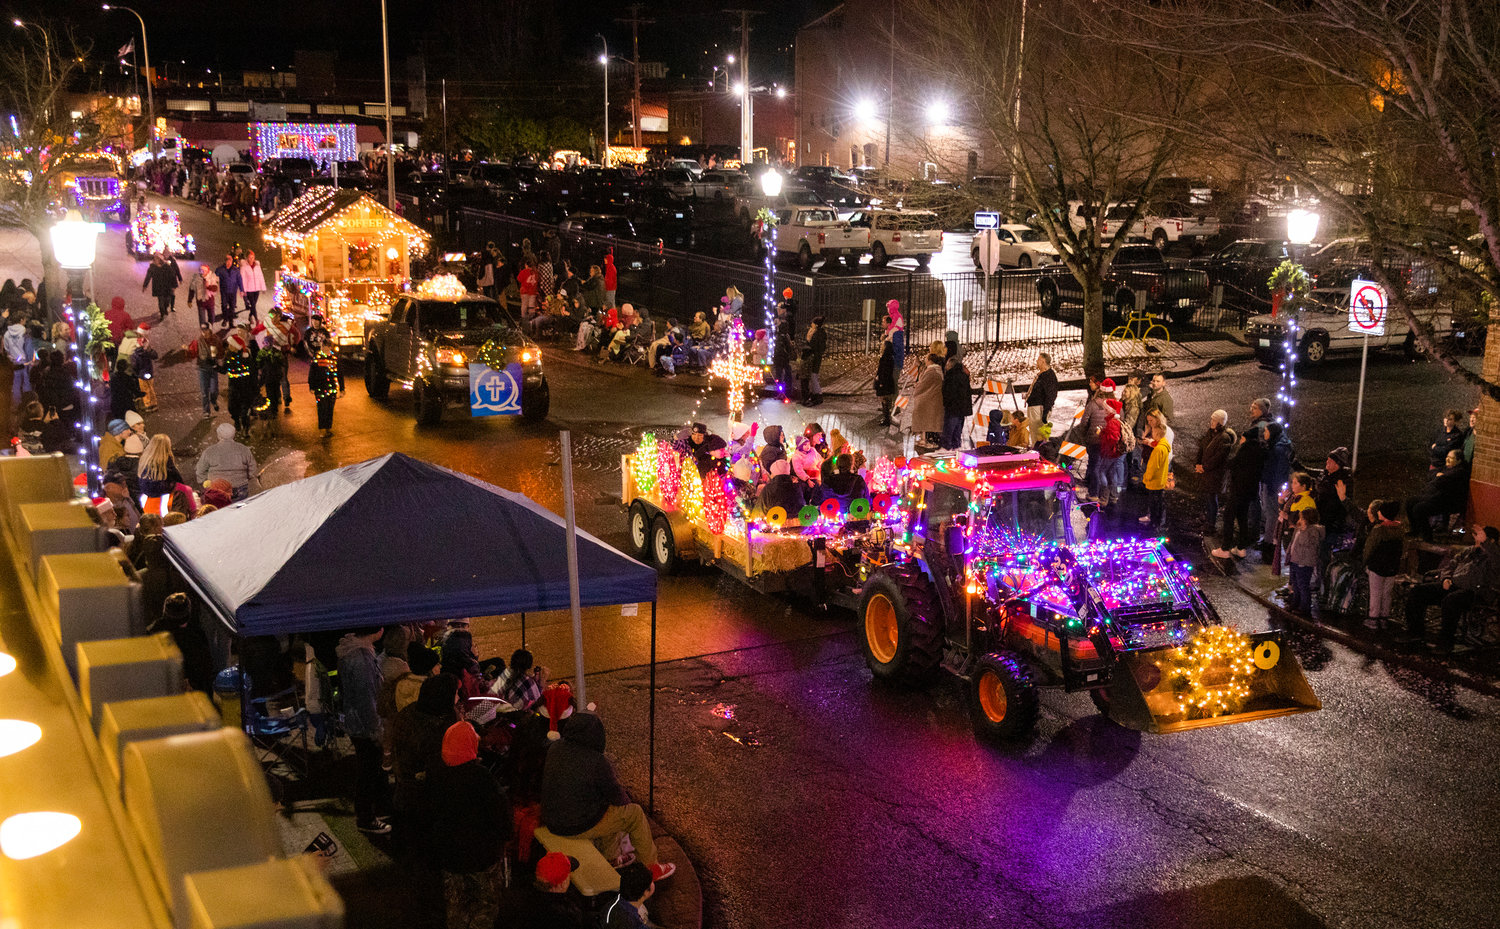 Crowds gather for the Lighted Tractor Parade Saturday night in downtown Centralia.